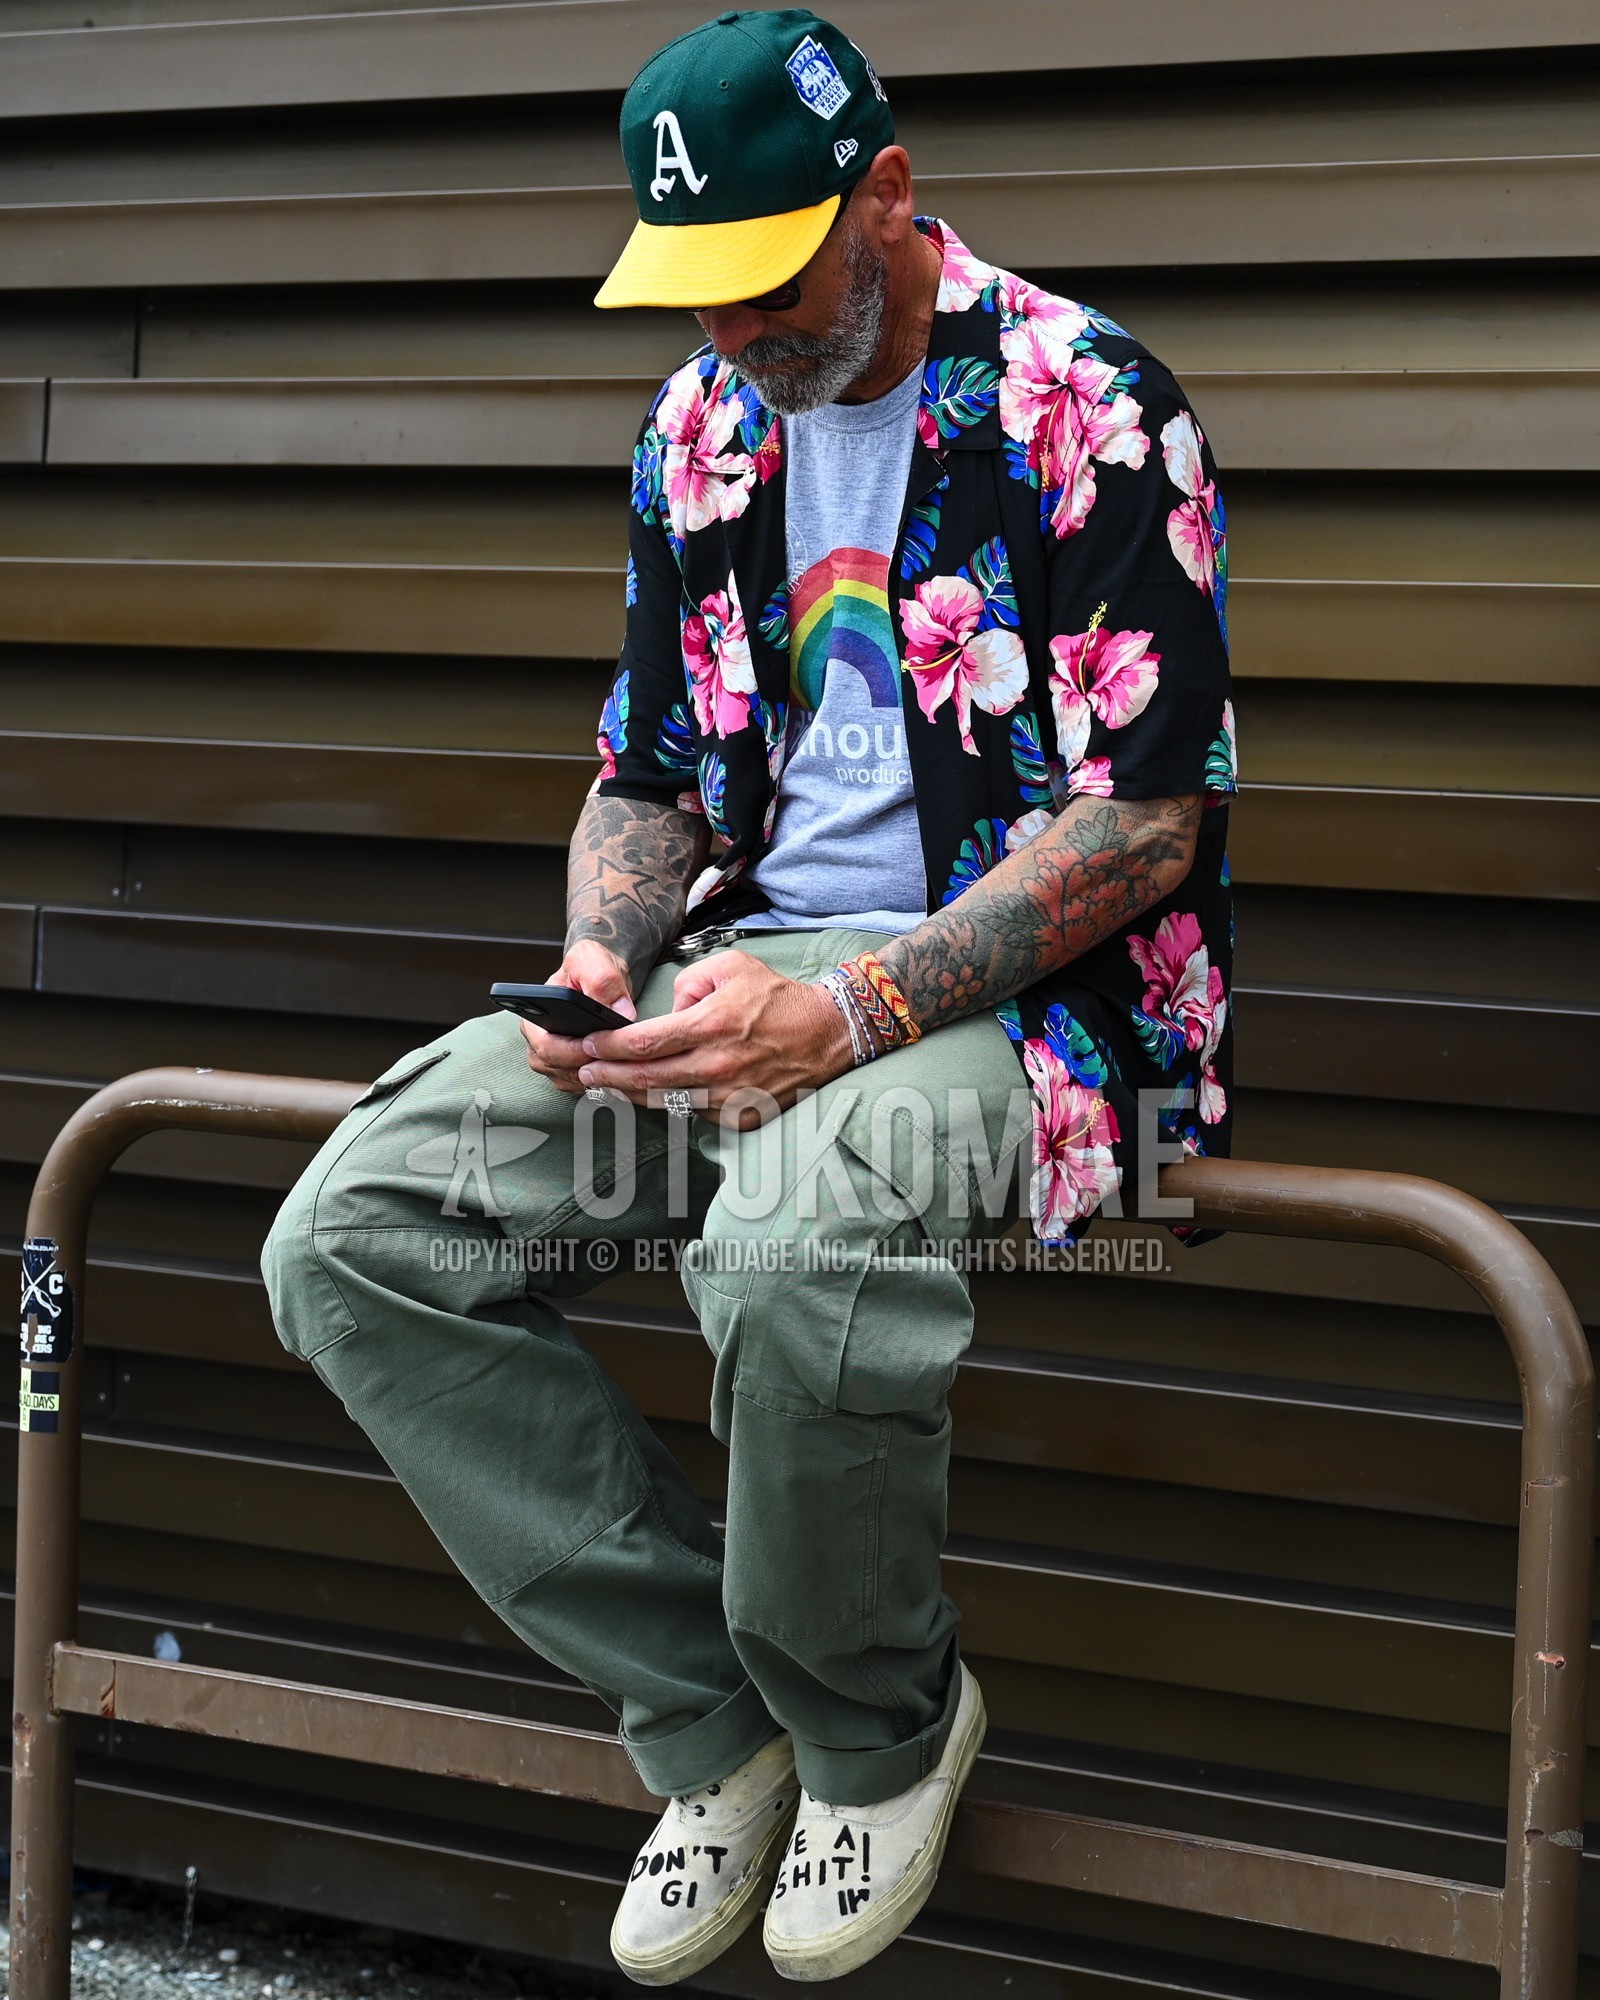 Men's spring summer outfit with green one point baseball cap, black whole pattern shirt, gray tops/innerwear t-shirt, olive green plain cargo pants, white slip-on sneakers.